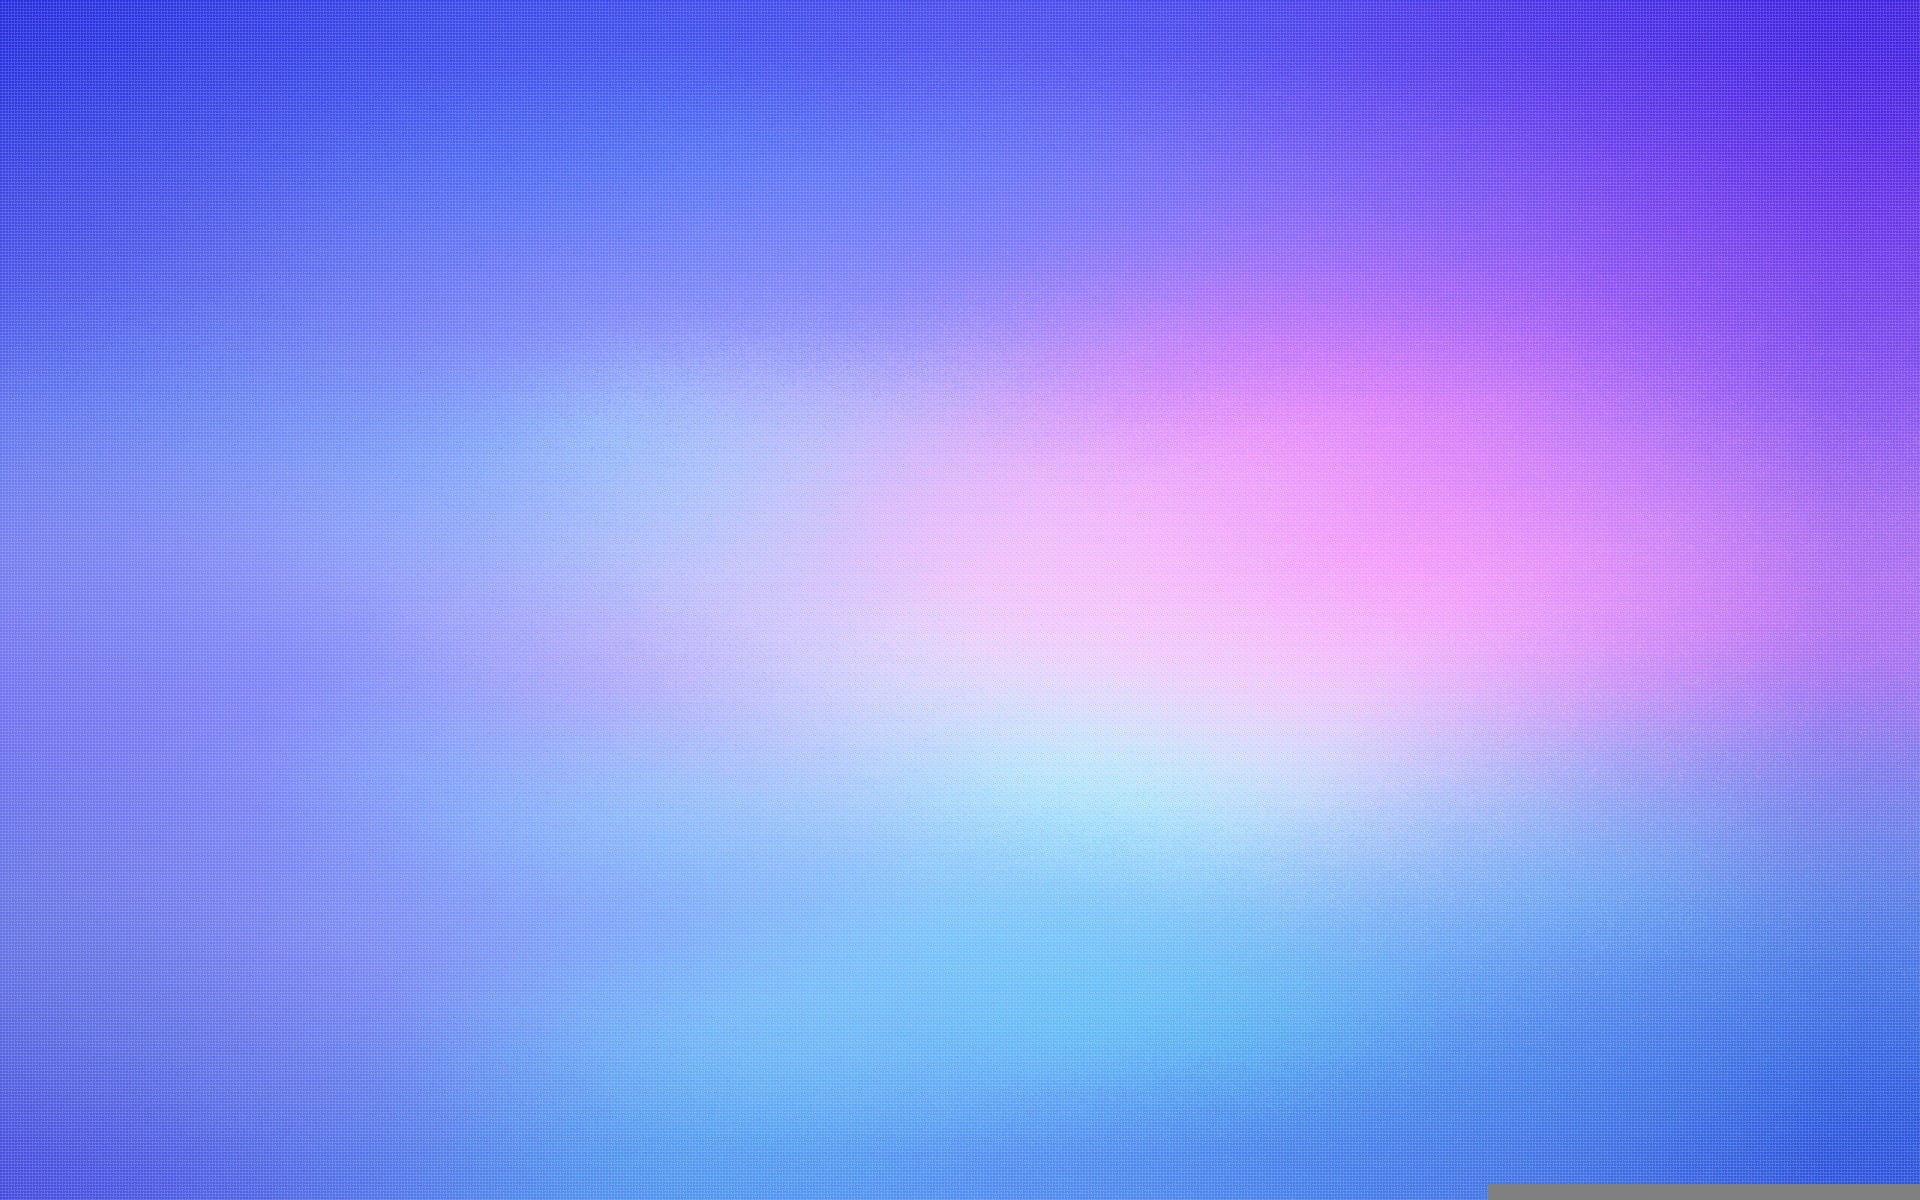 glow, gradient, texture, backgrounds, blue, abstract, multi Colored